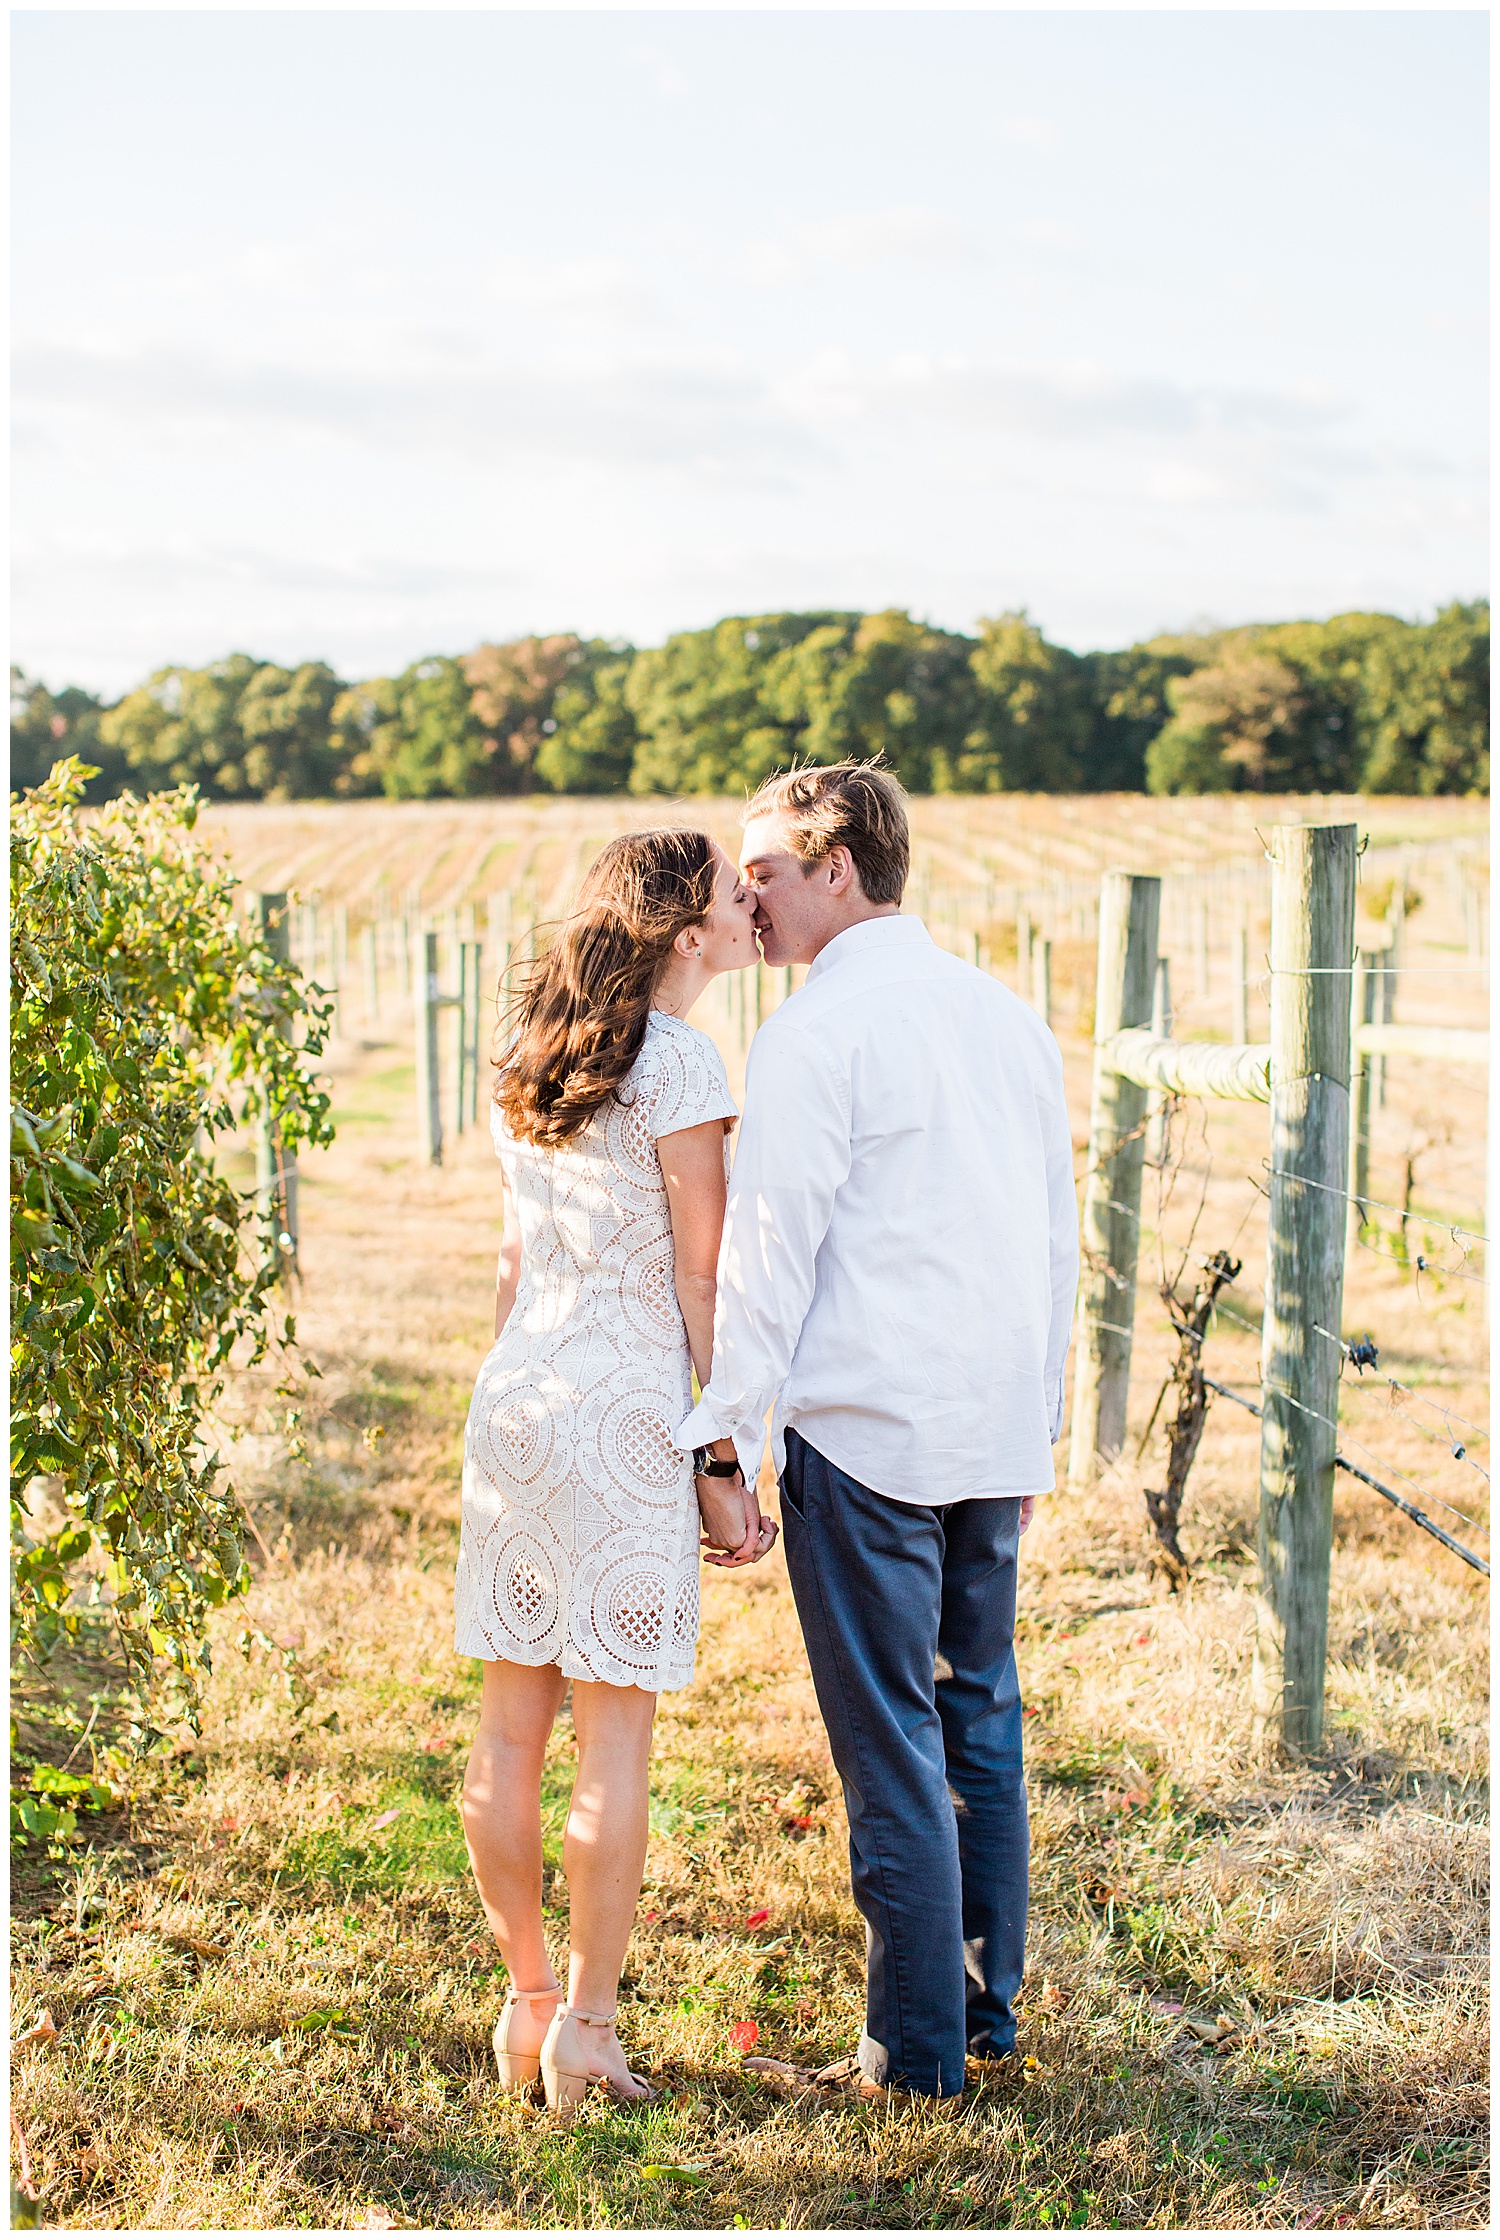 Couple kiss in the winery with a field behind them